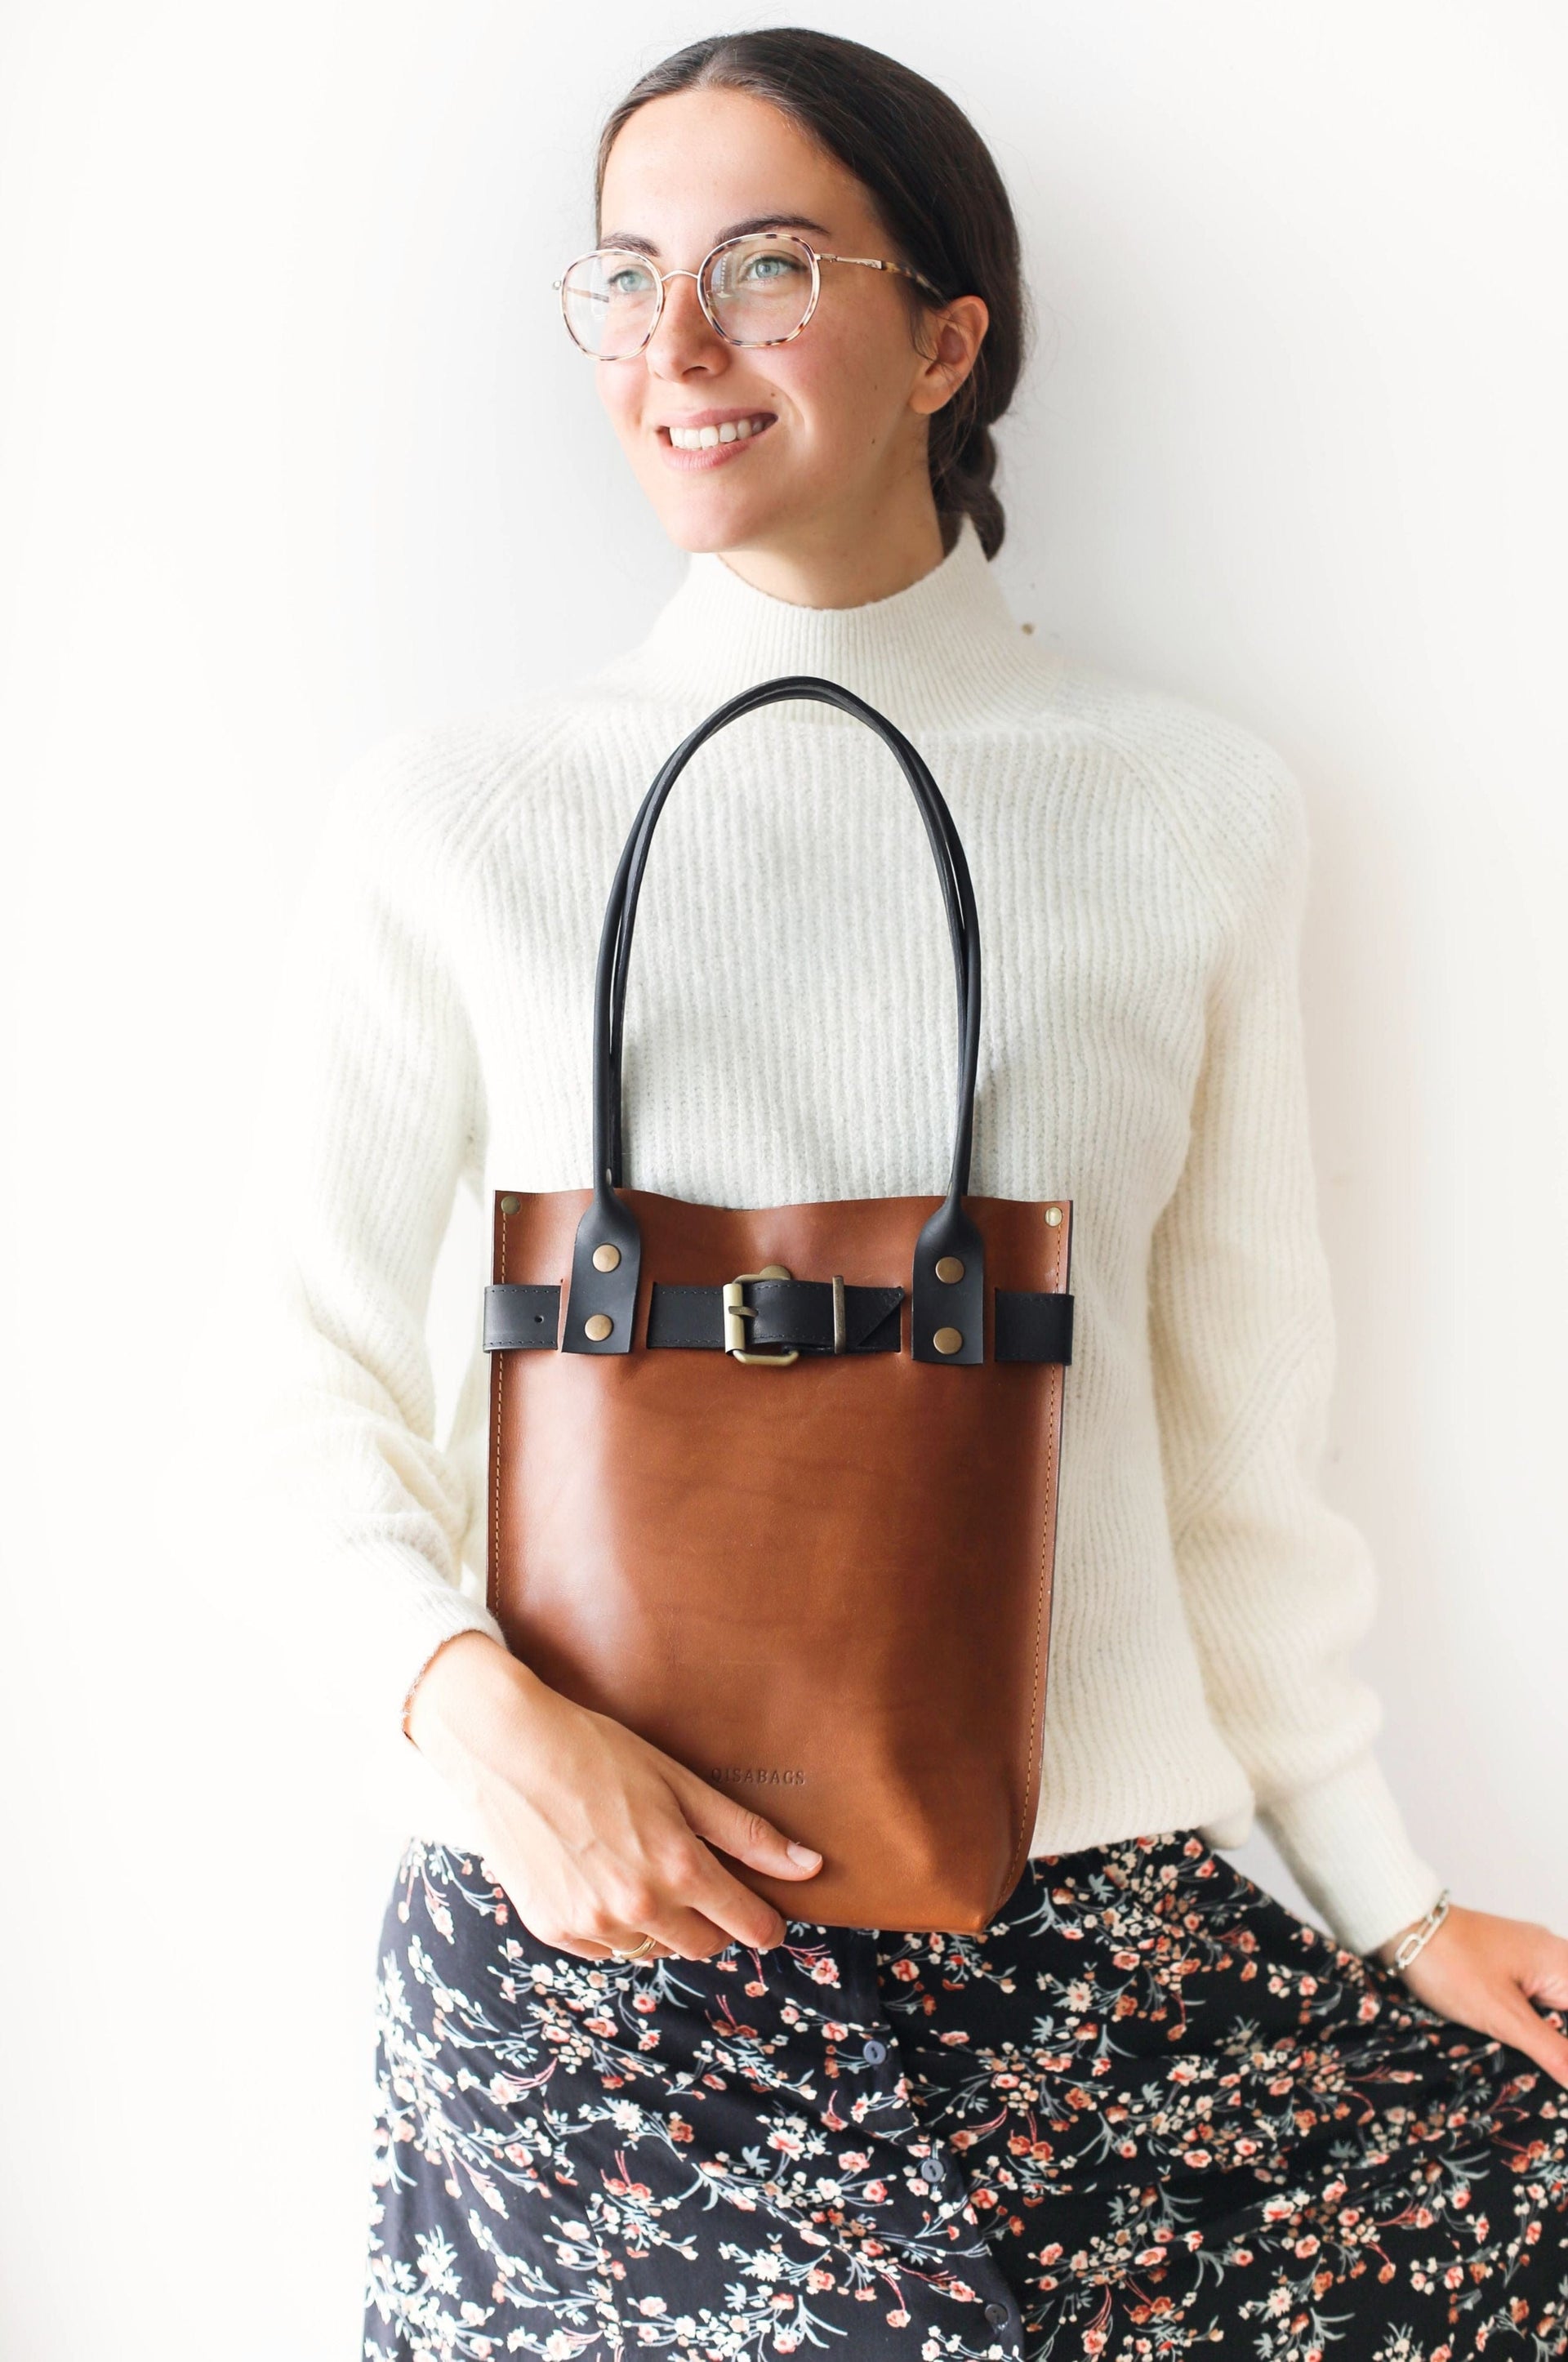 Brown Leather Purses